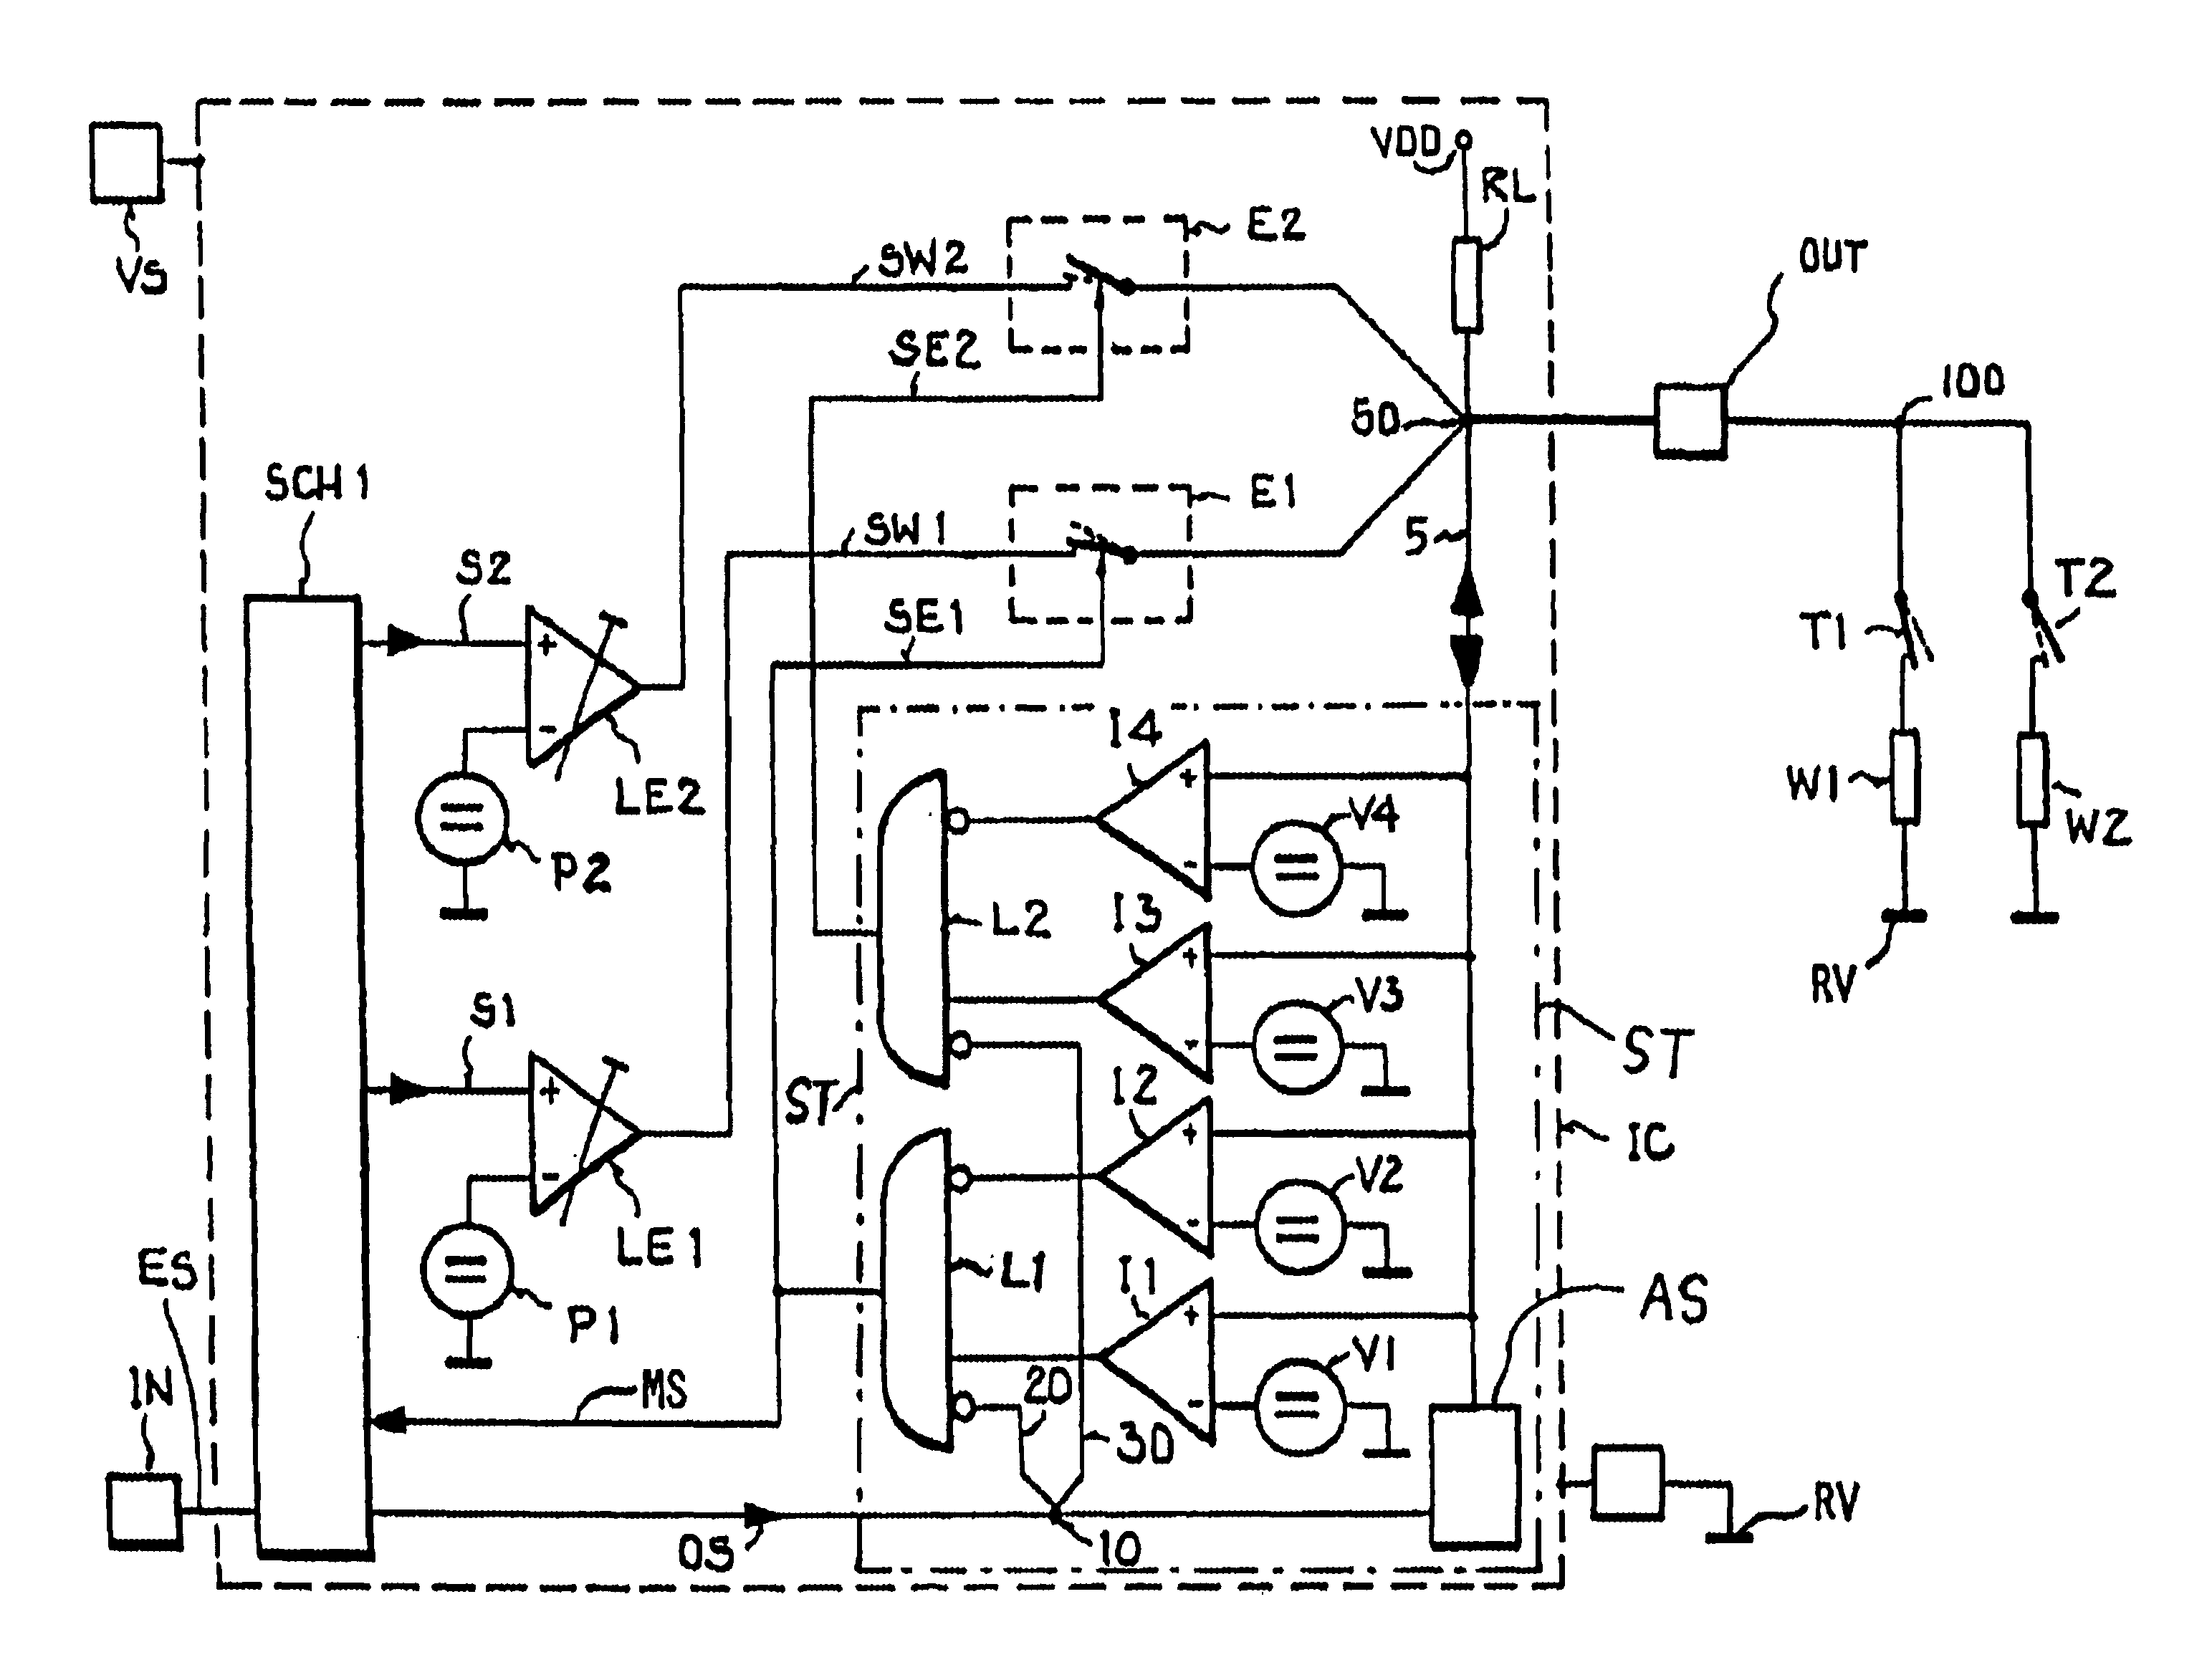 Integrated circuit that can be externally tested through a normal signal output pin